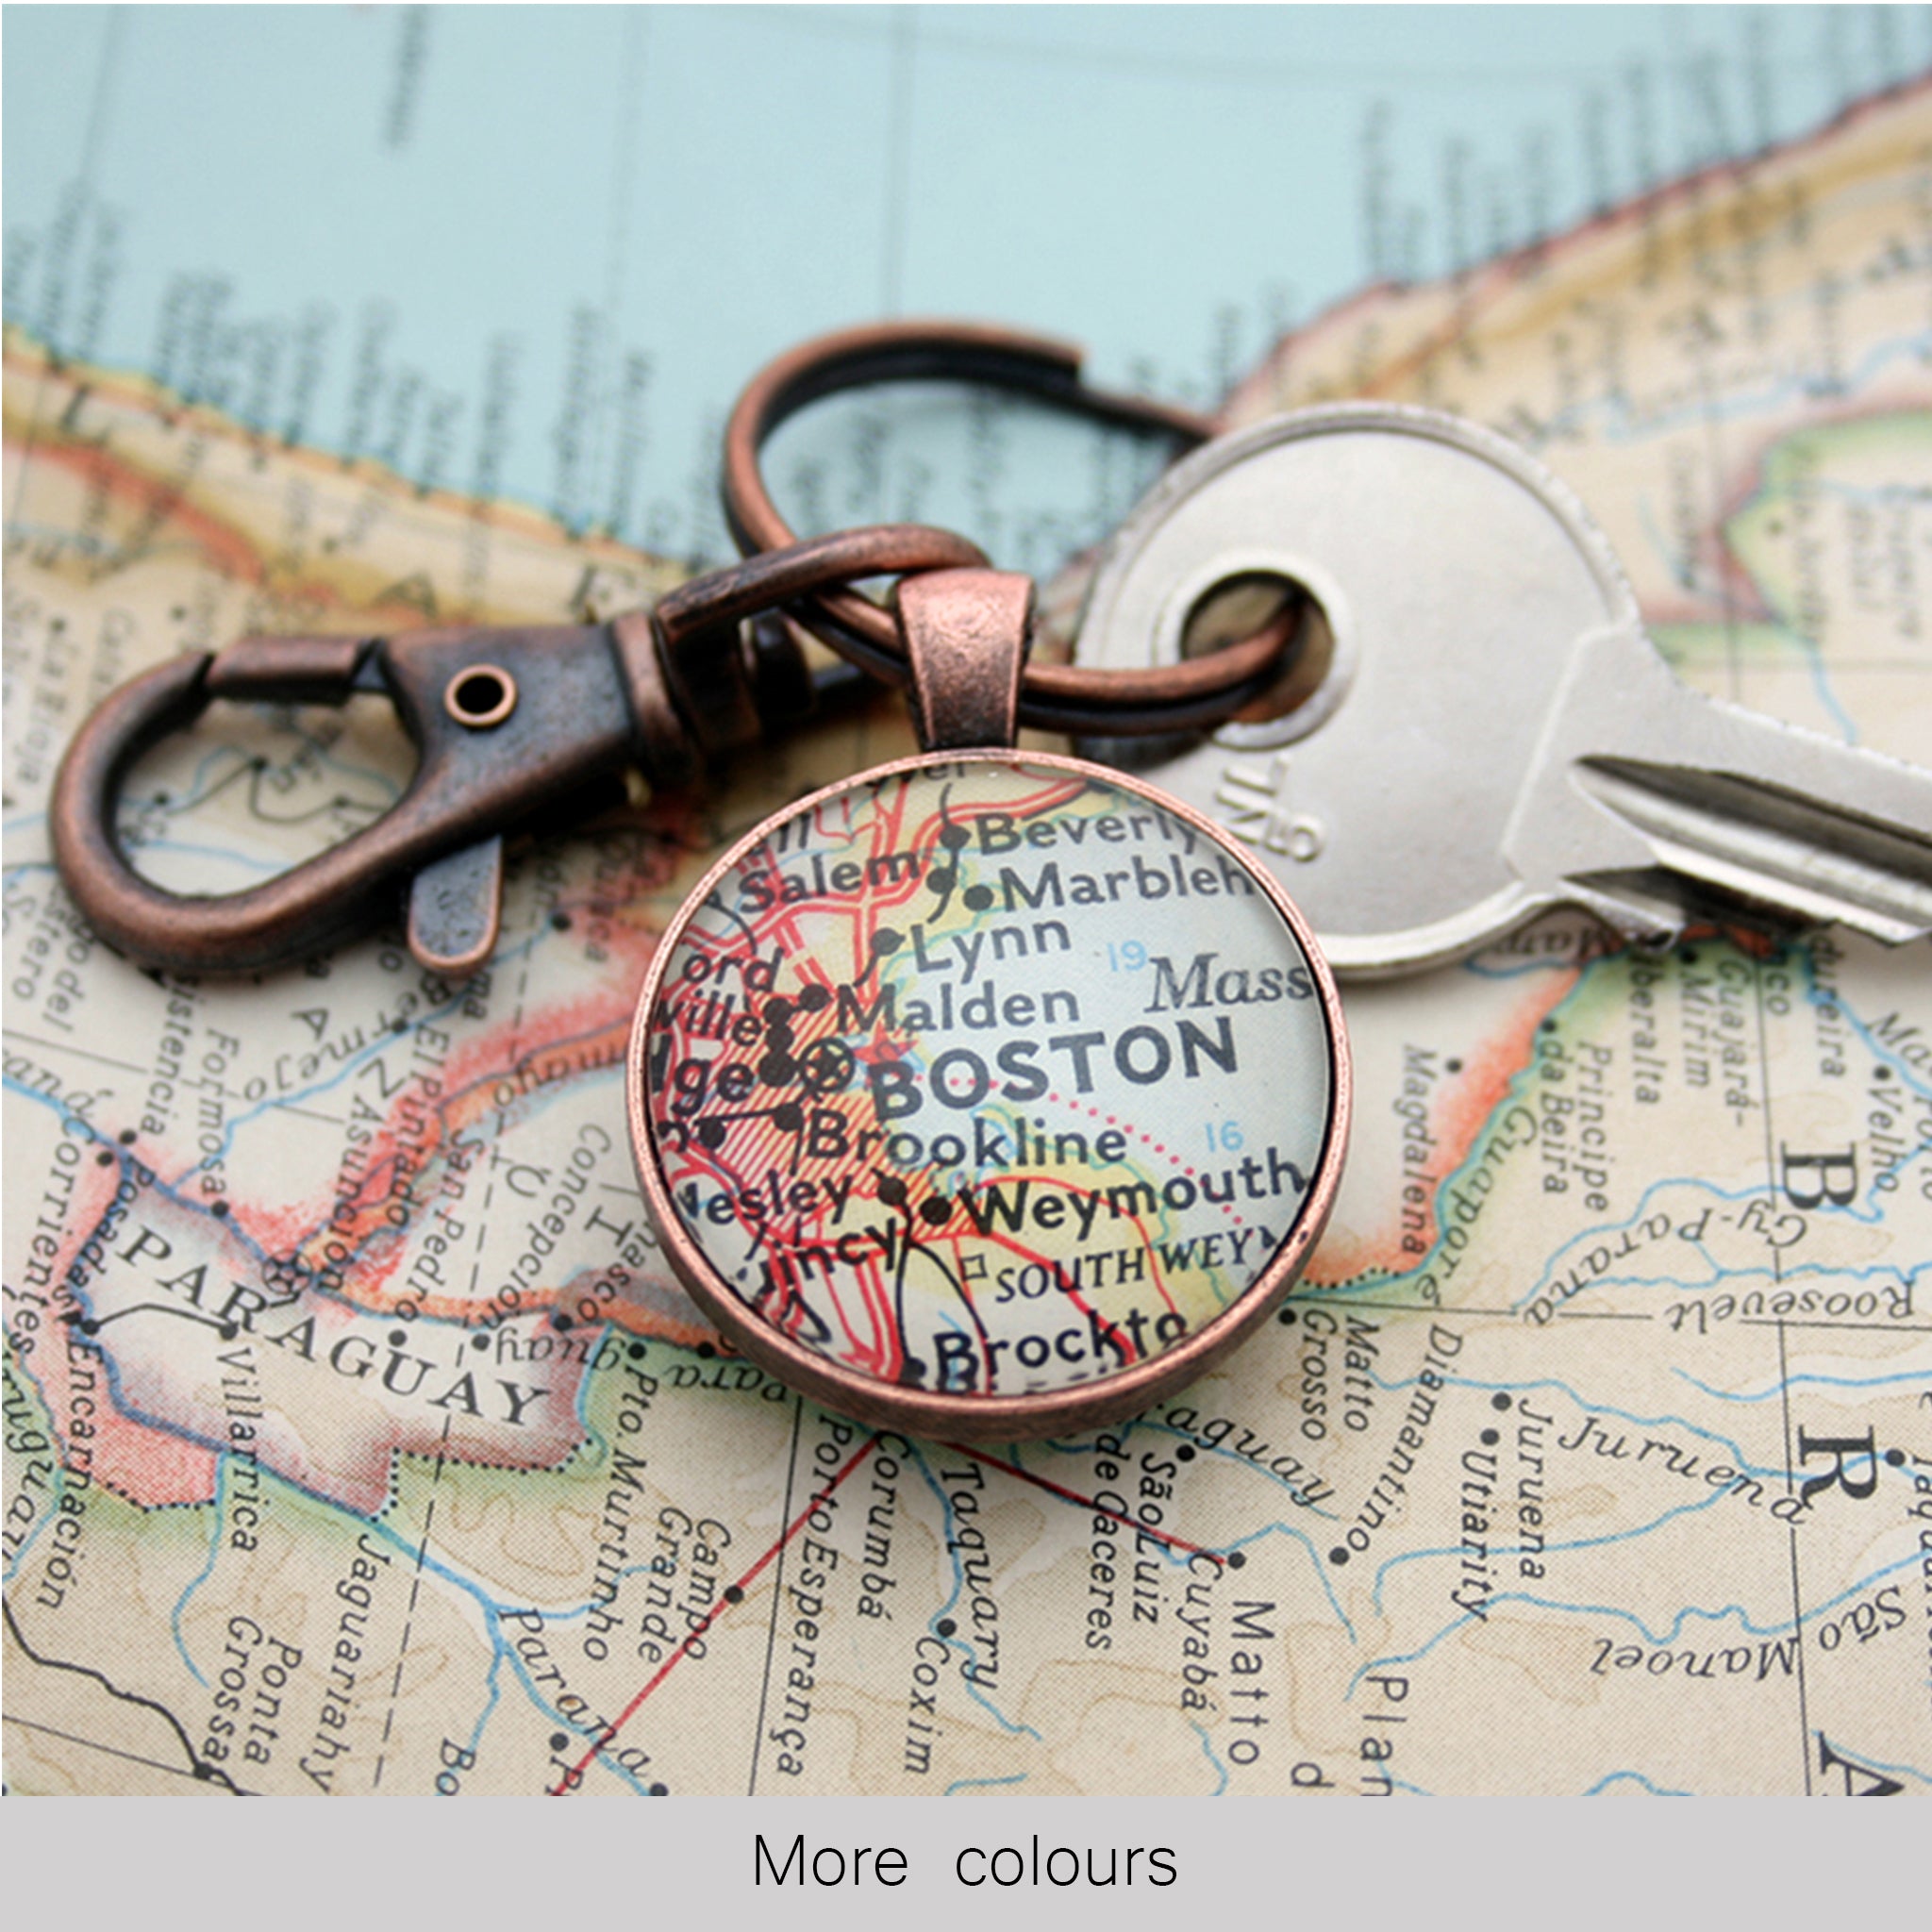 Personalised Keyring in copper color featuring map of Boston